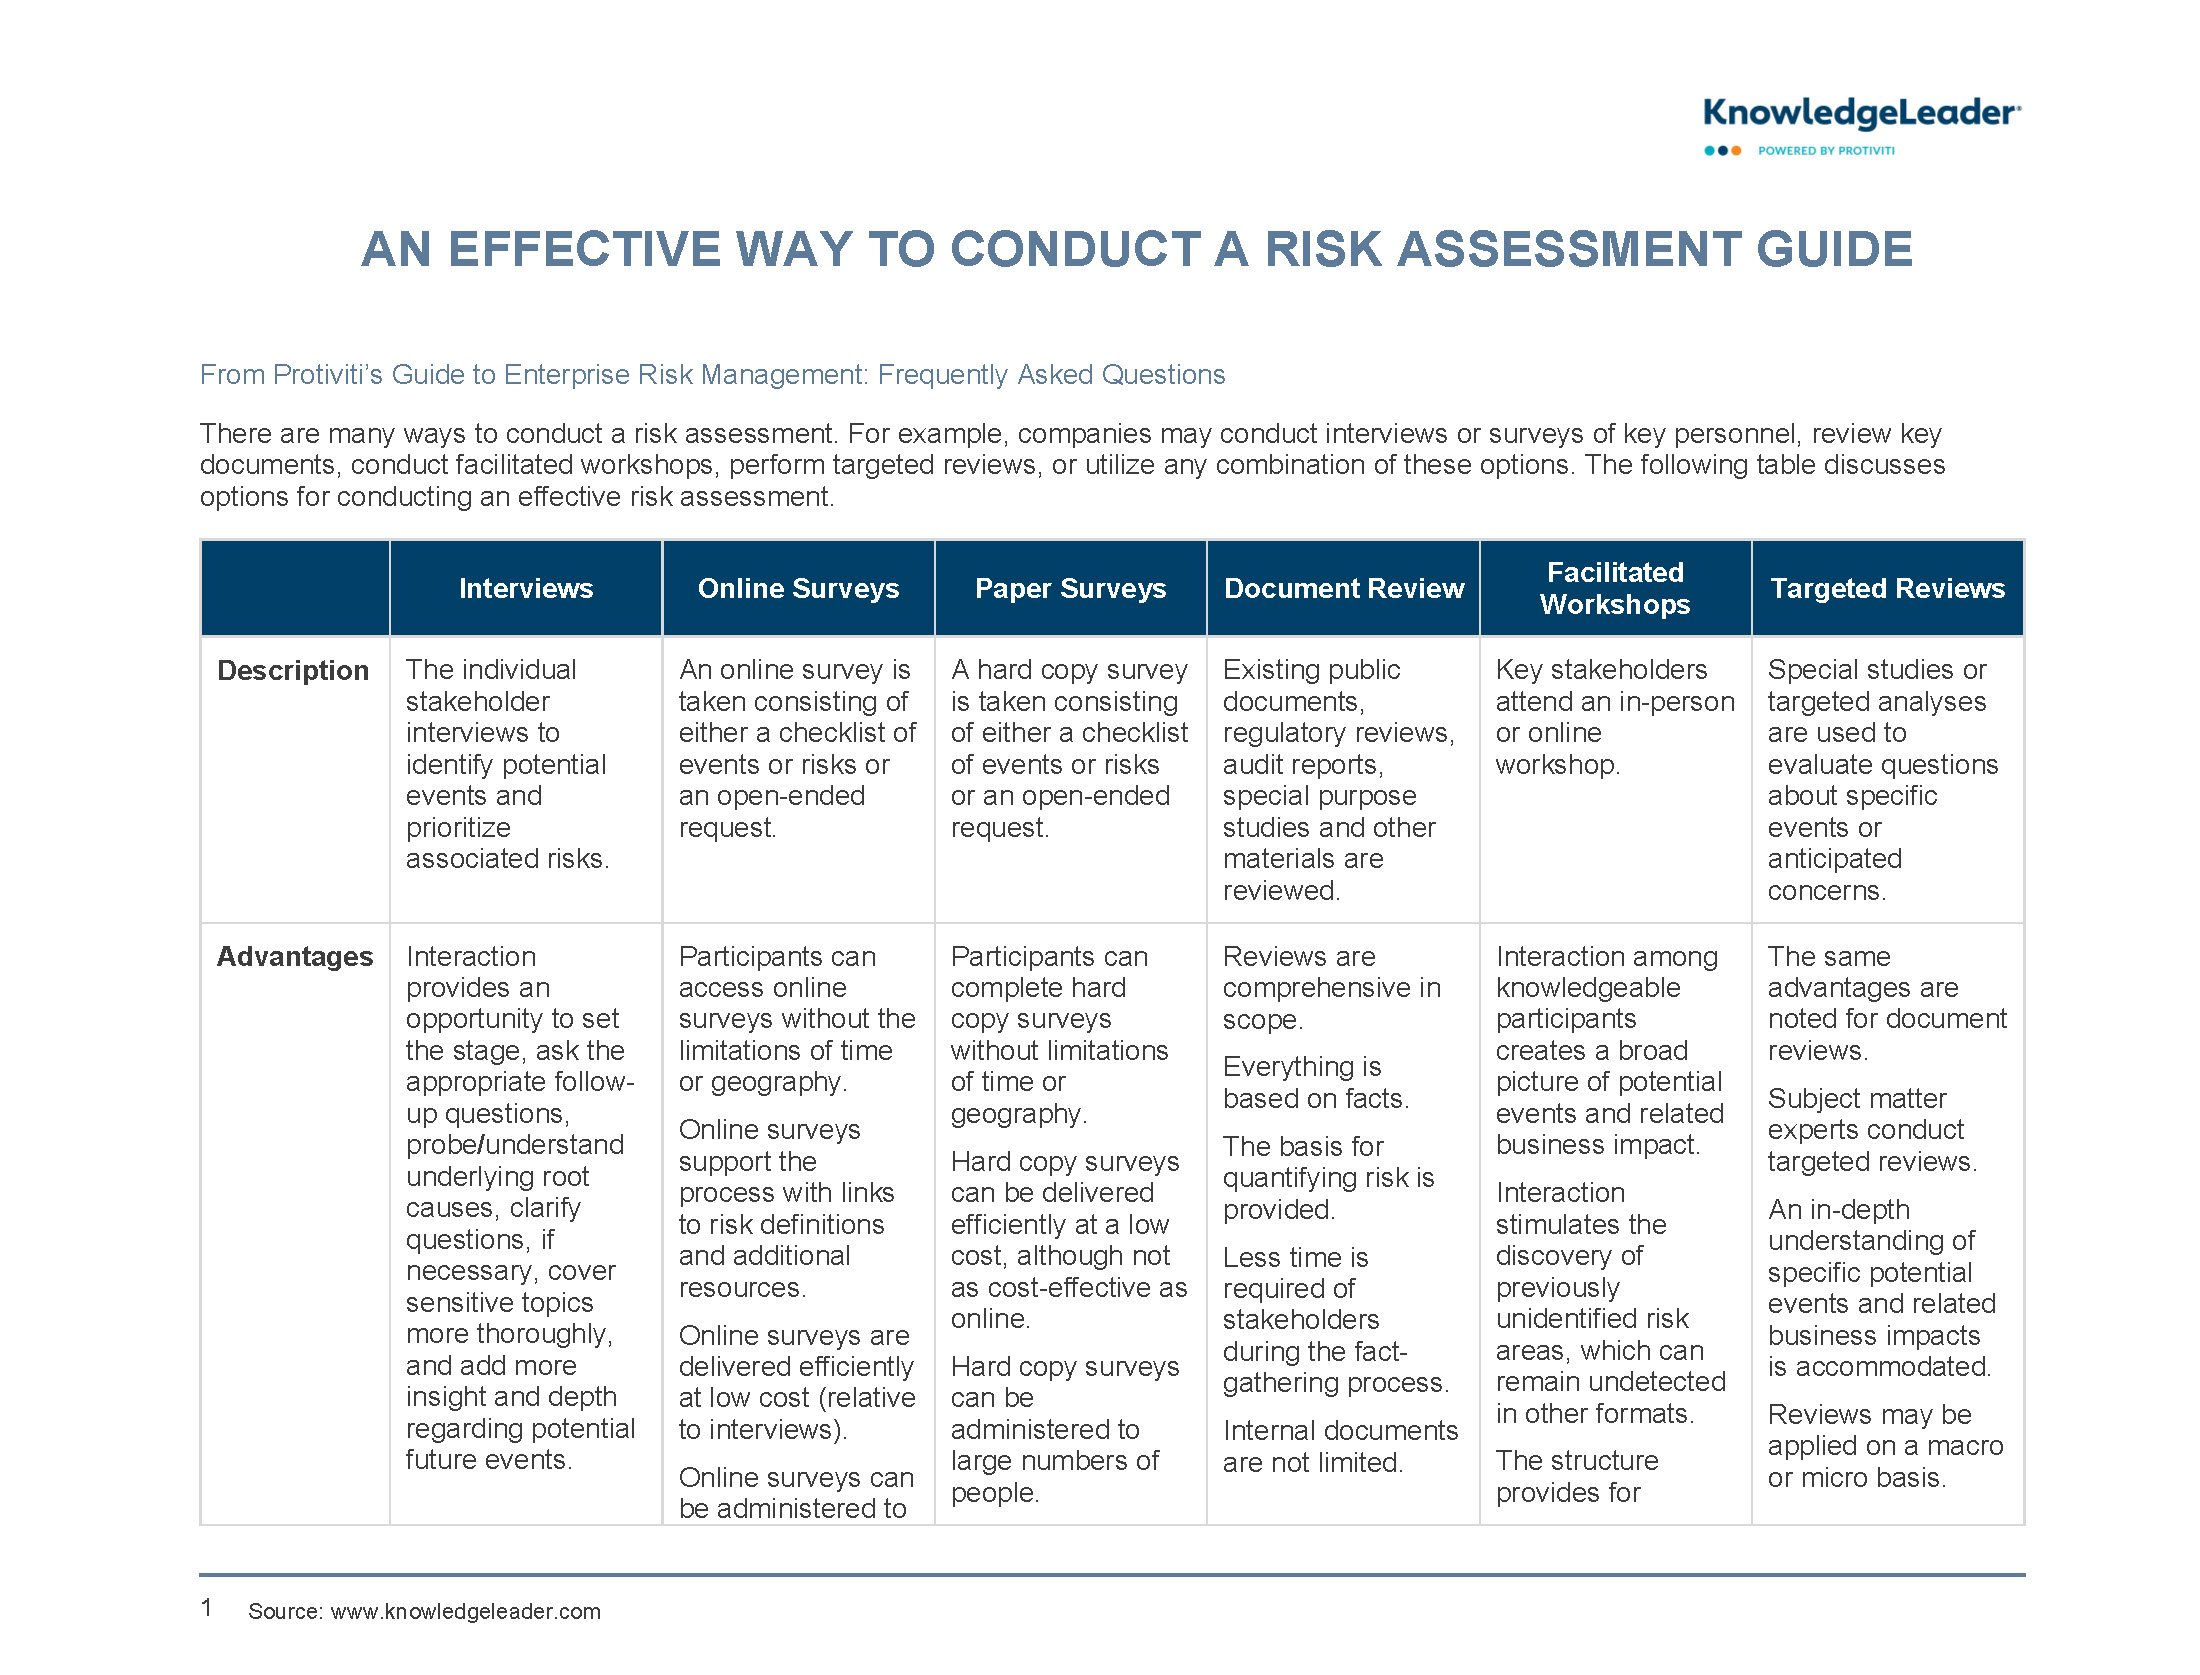 Screenshot of the first page of An Effective Way to Conduct a Risk Assessment Guide